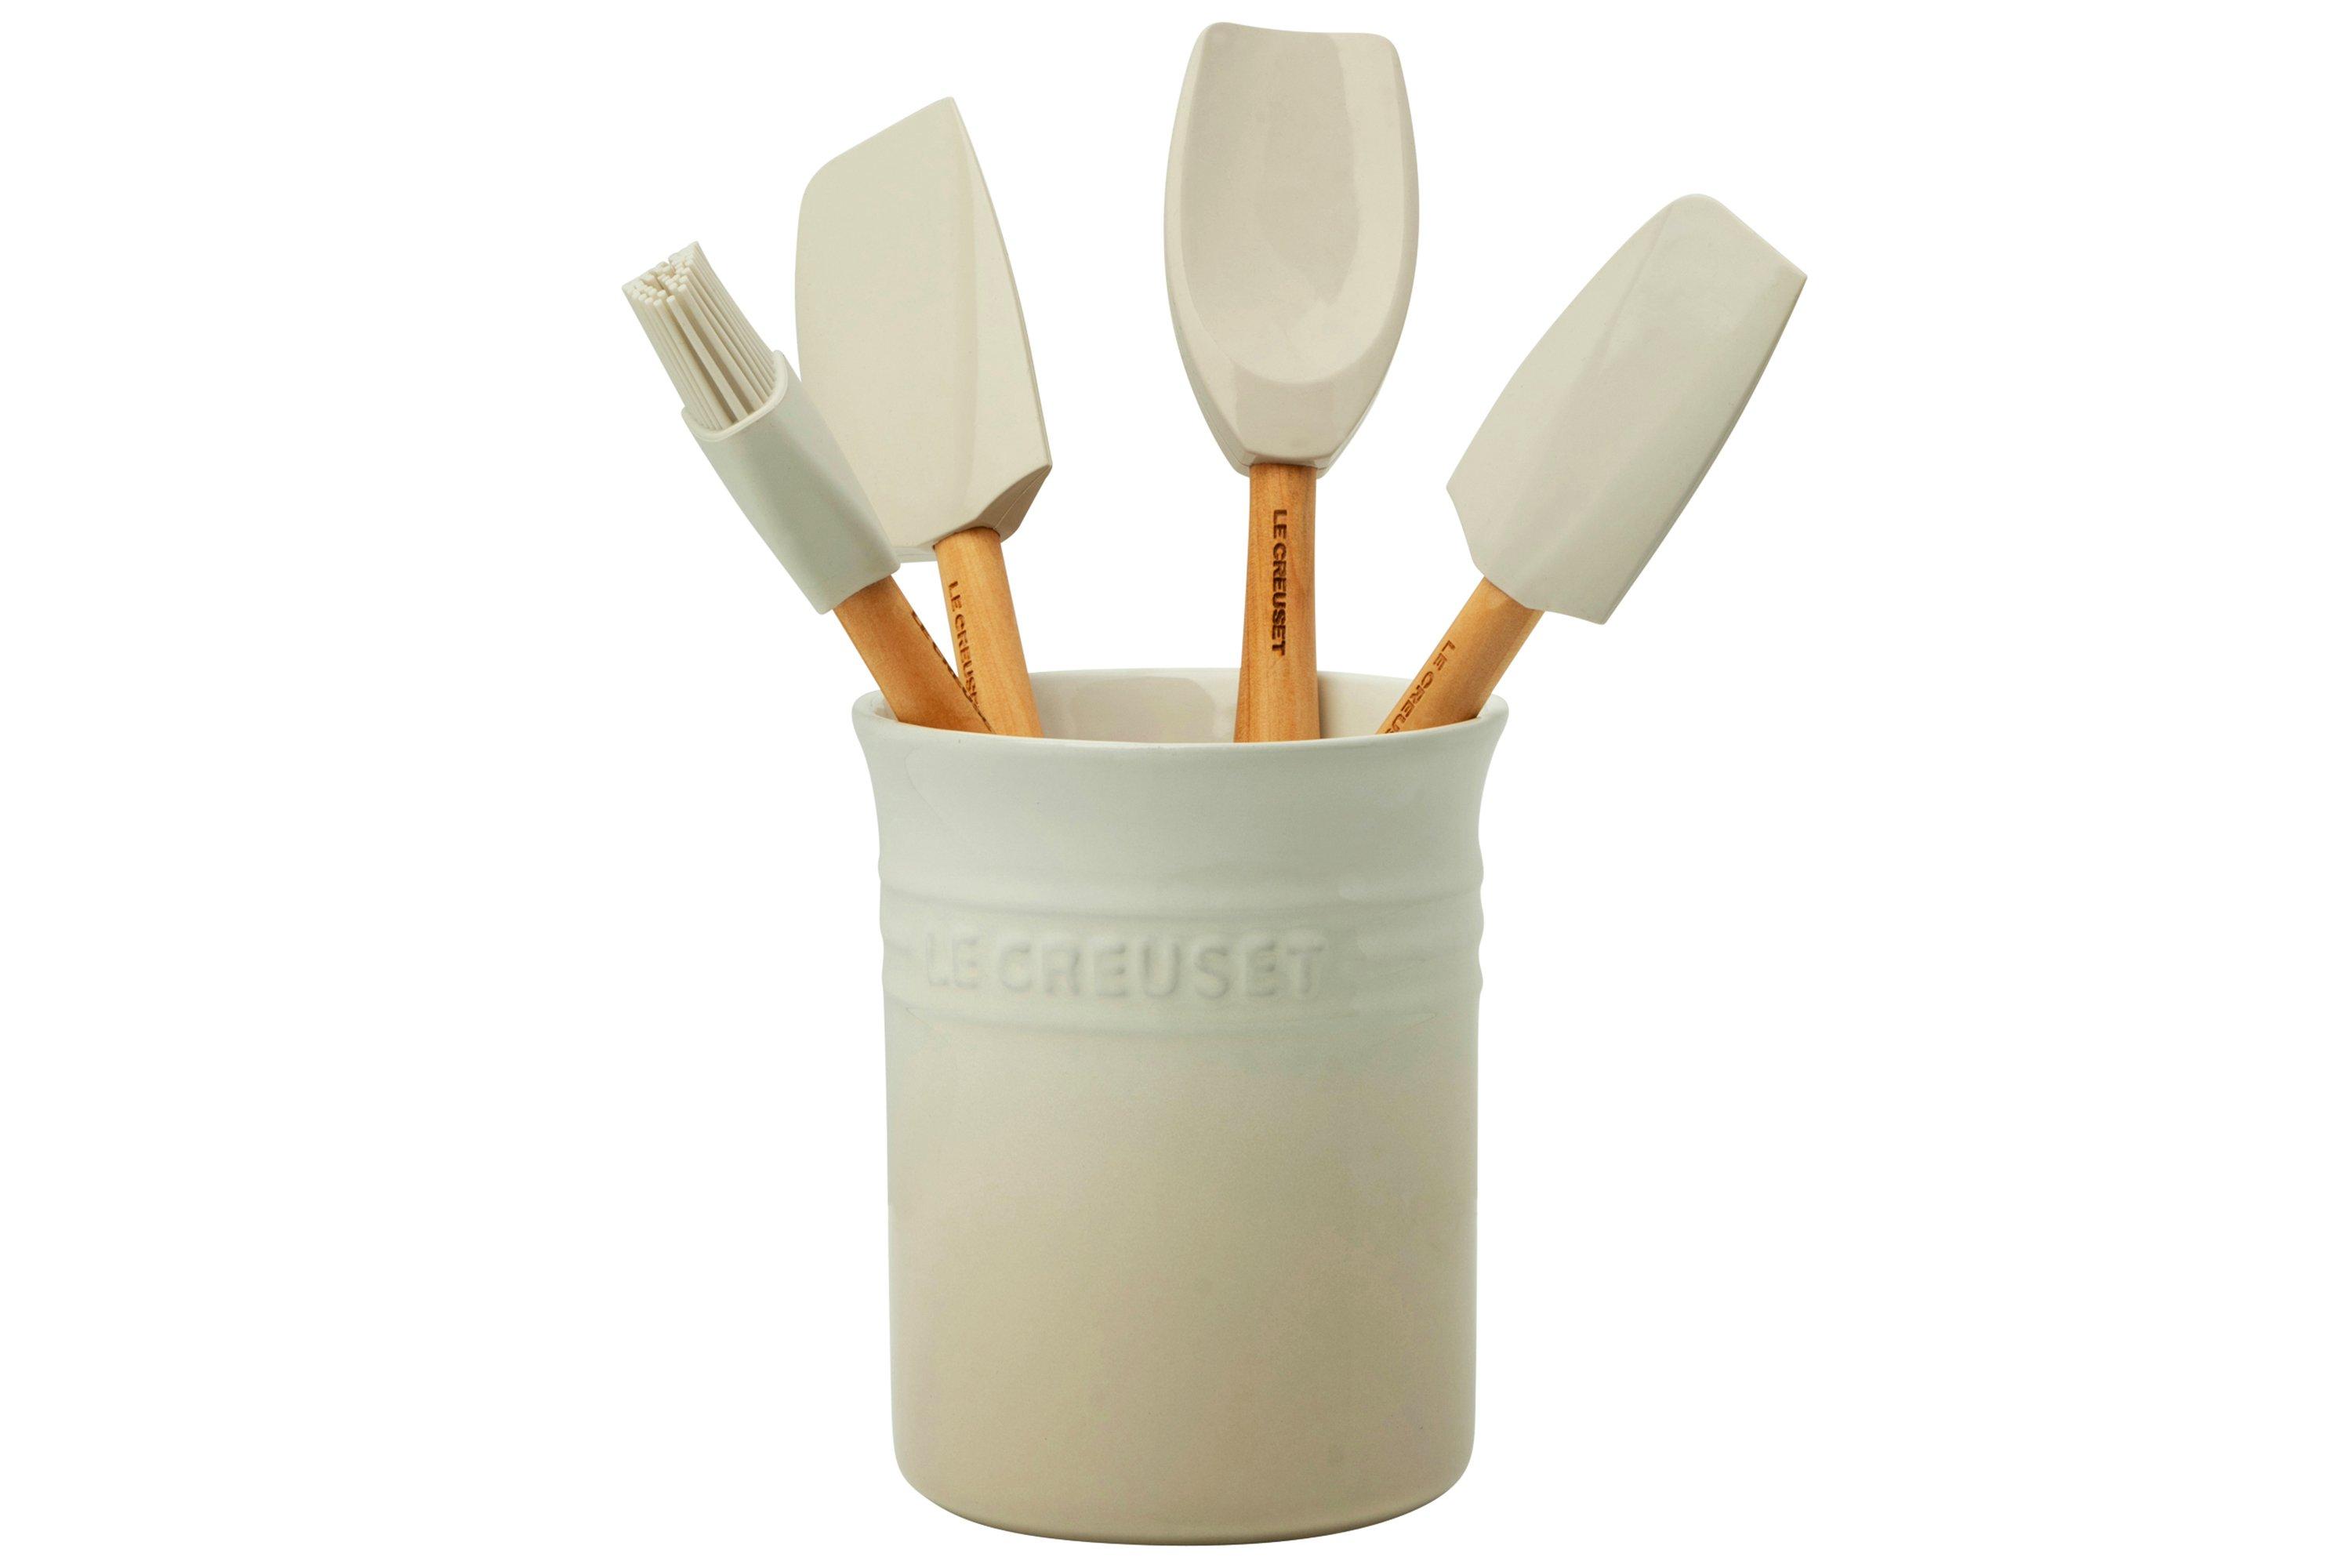 Le Creuset 5-Piece White Kitchen Utensils with Holder Set + Reviews